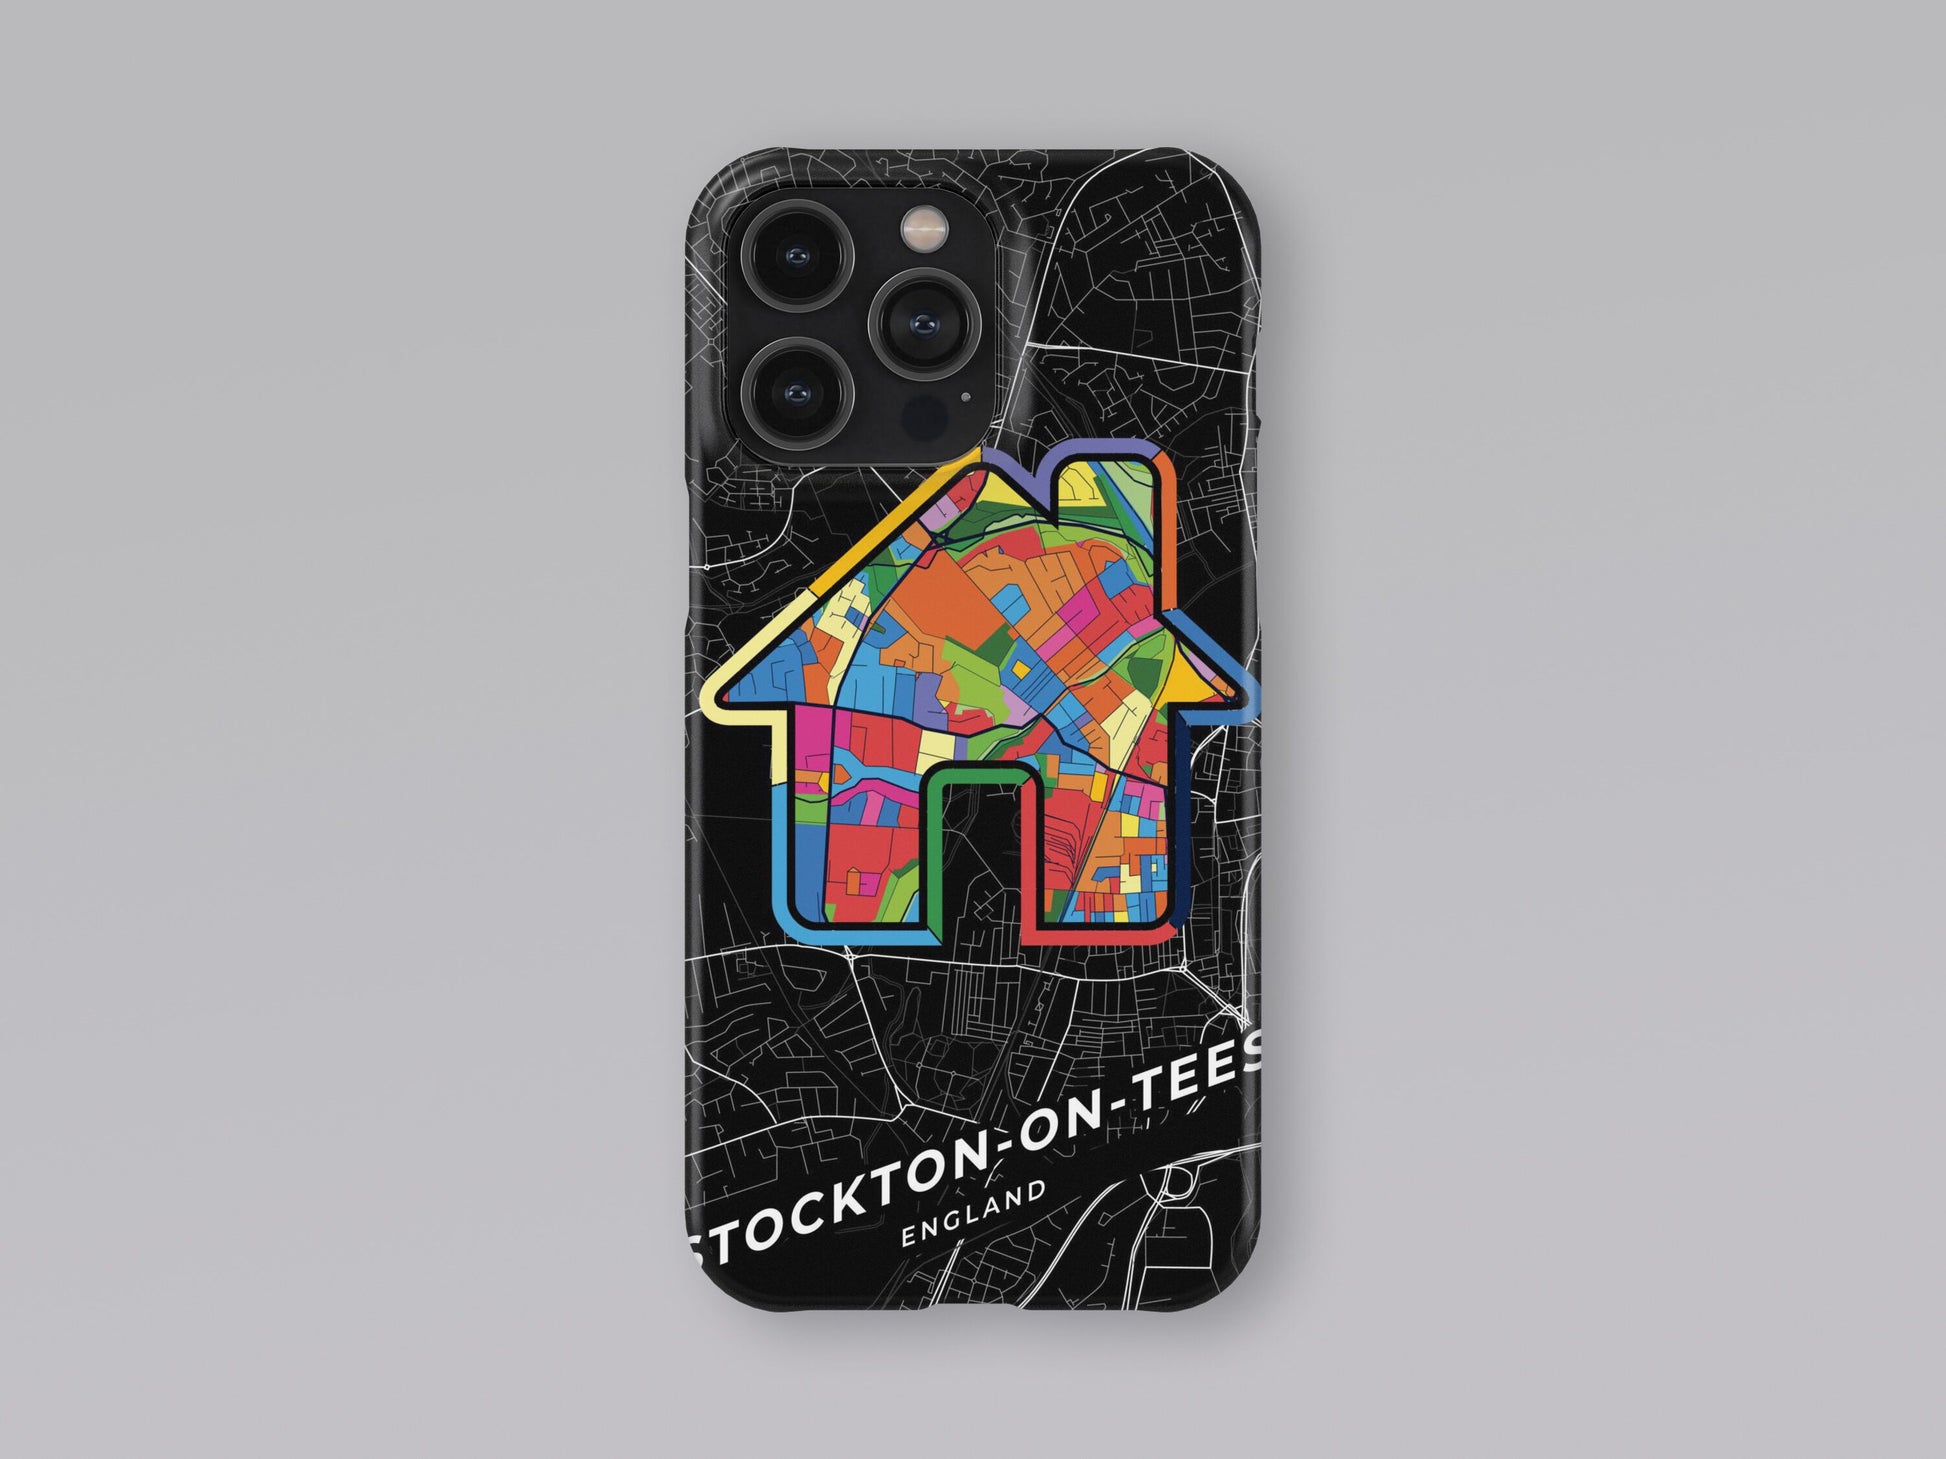 Stockton-On-Tees England slim phone case with colorful icon 3